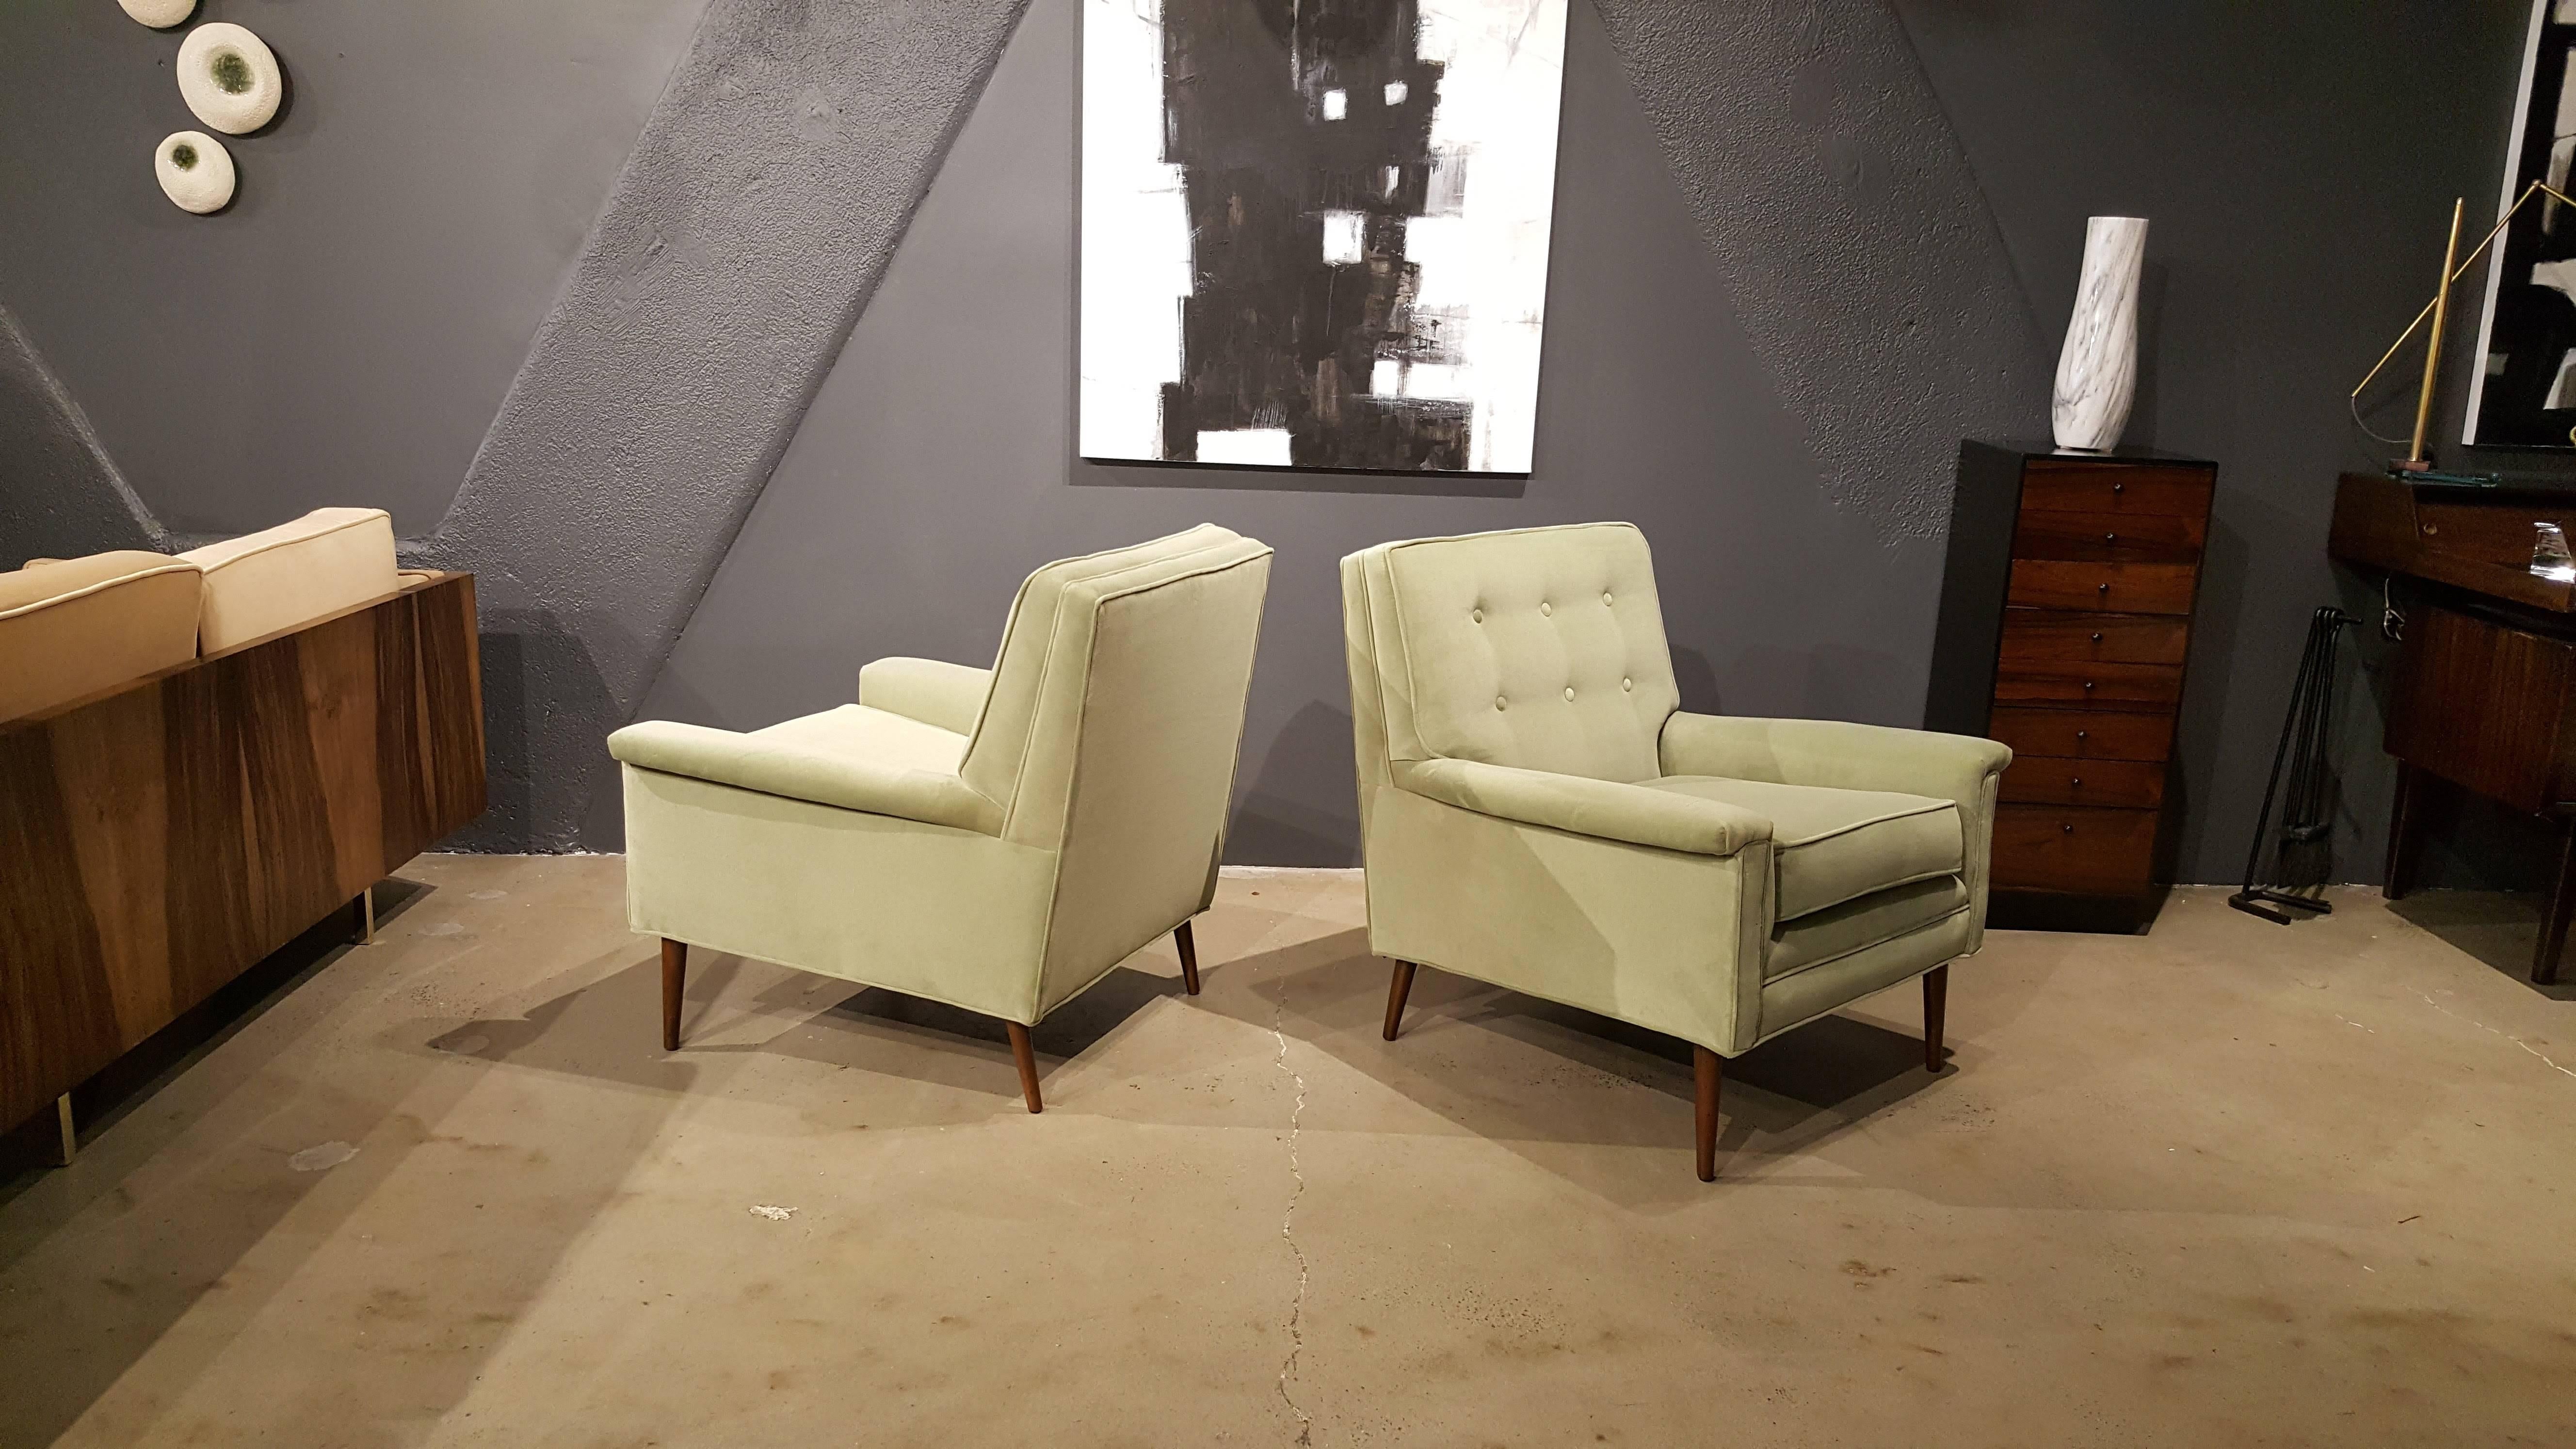 Pair of stately Mid-Century Modern lounge chairs attributed to Paul McCobb, early 1960s. Upholstered in lovely, soft Paris Green cotton velvet with turned walnut legs. Very comfortable, sturdy and well made with classic lines that work well in